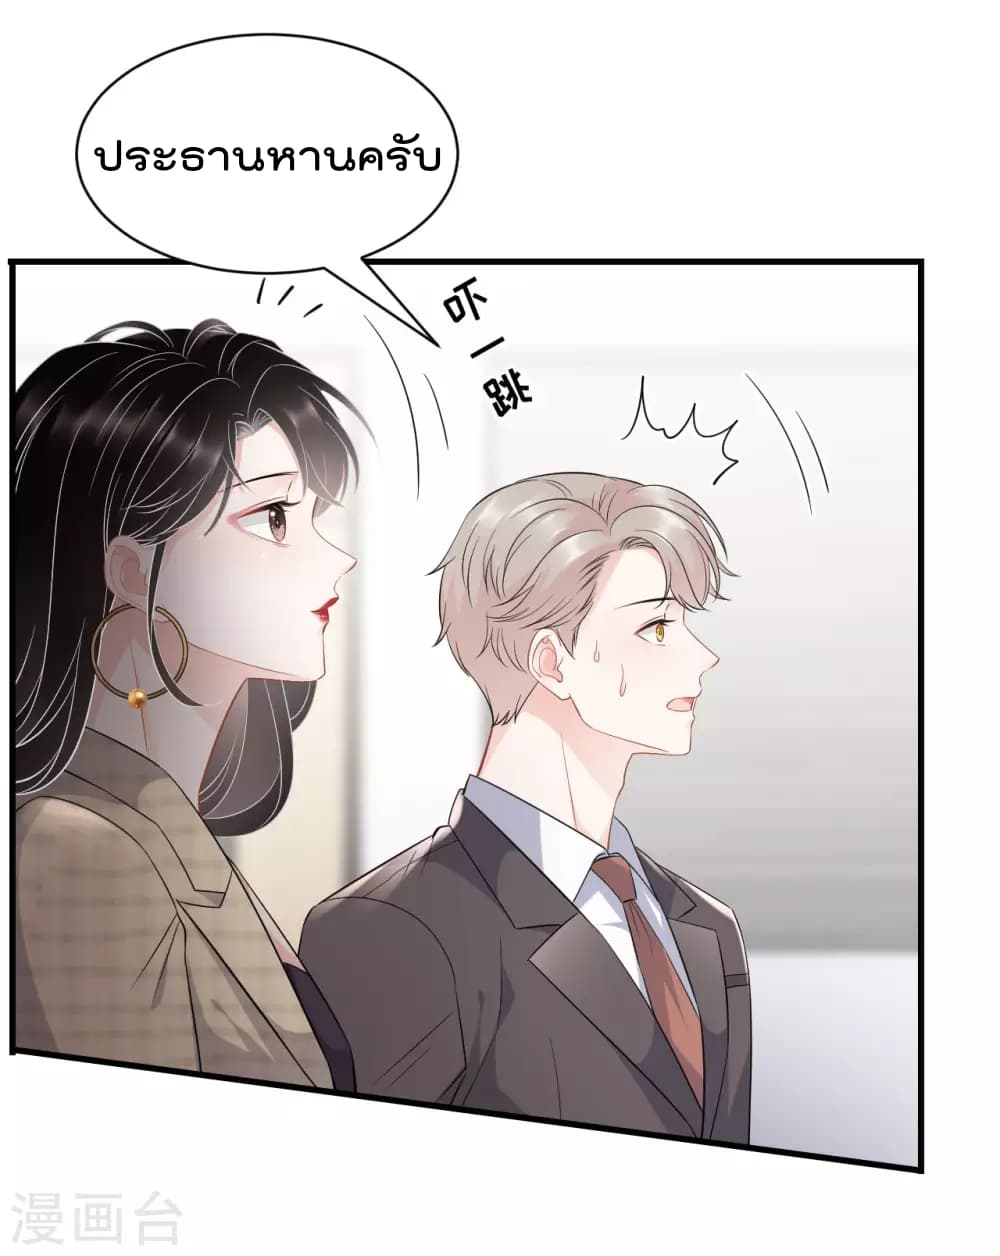 What Can the Eldest Lady Have คุณหนูใหญ่ ทำไมคุณร้ายอย่างนี้ 36-36